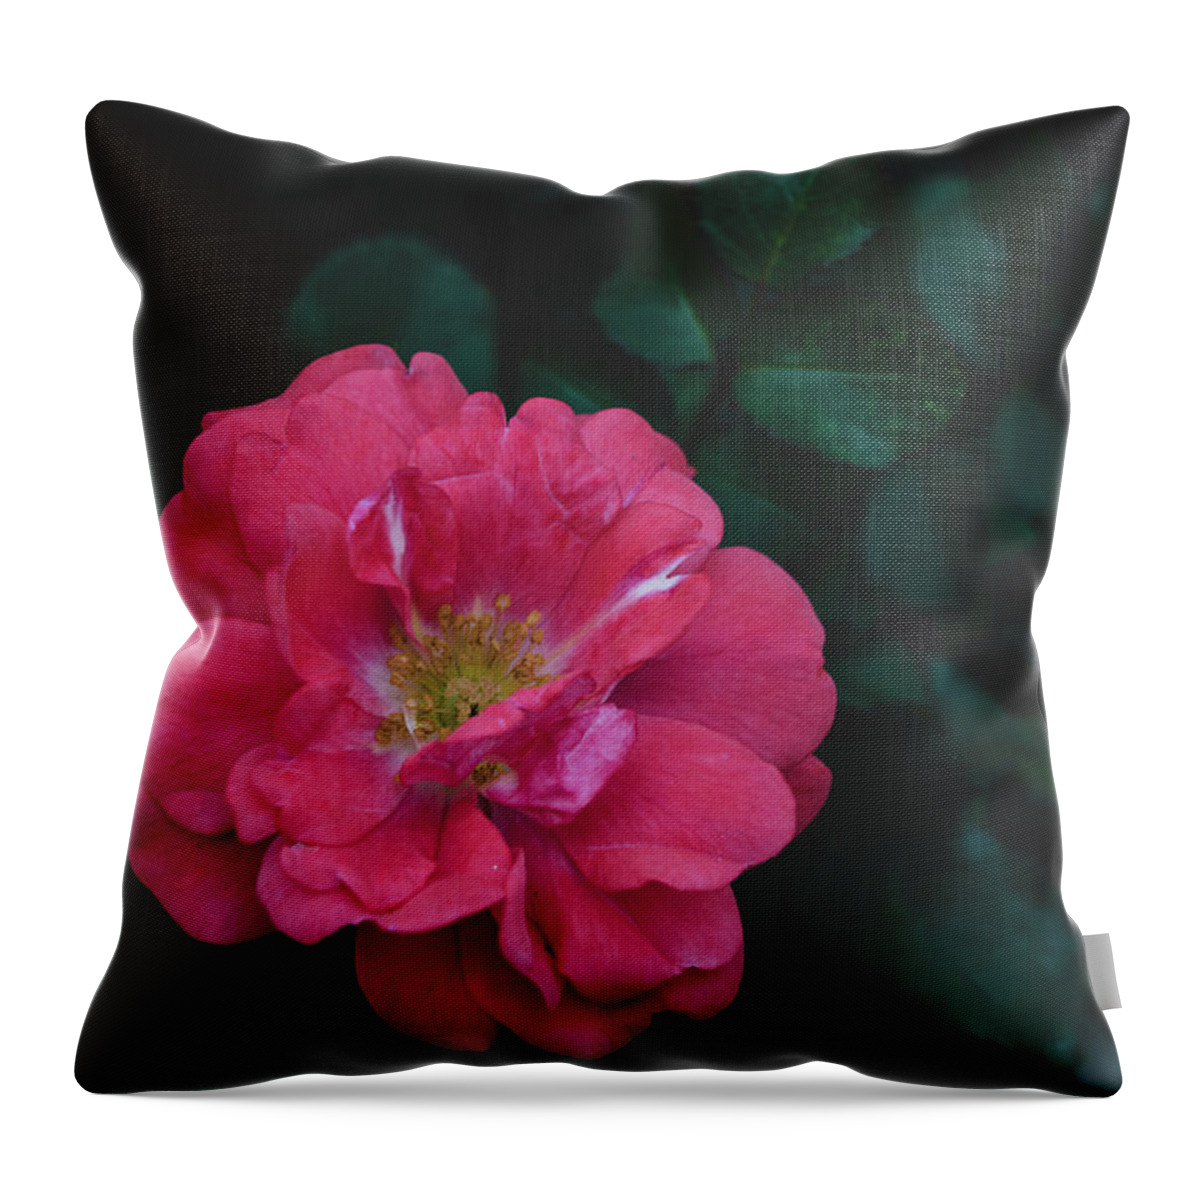 Flowers & Plants Throw Pillow featuring the painting The Tiny Rose by Adam Johnson